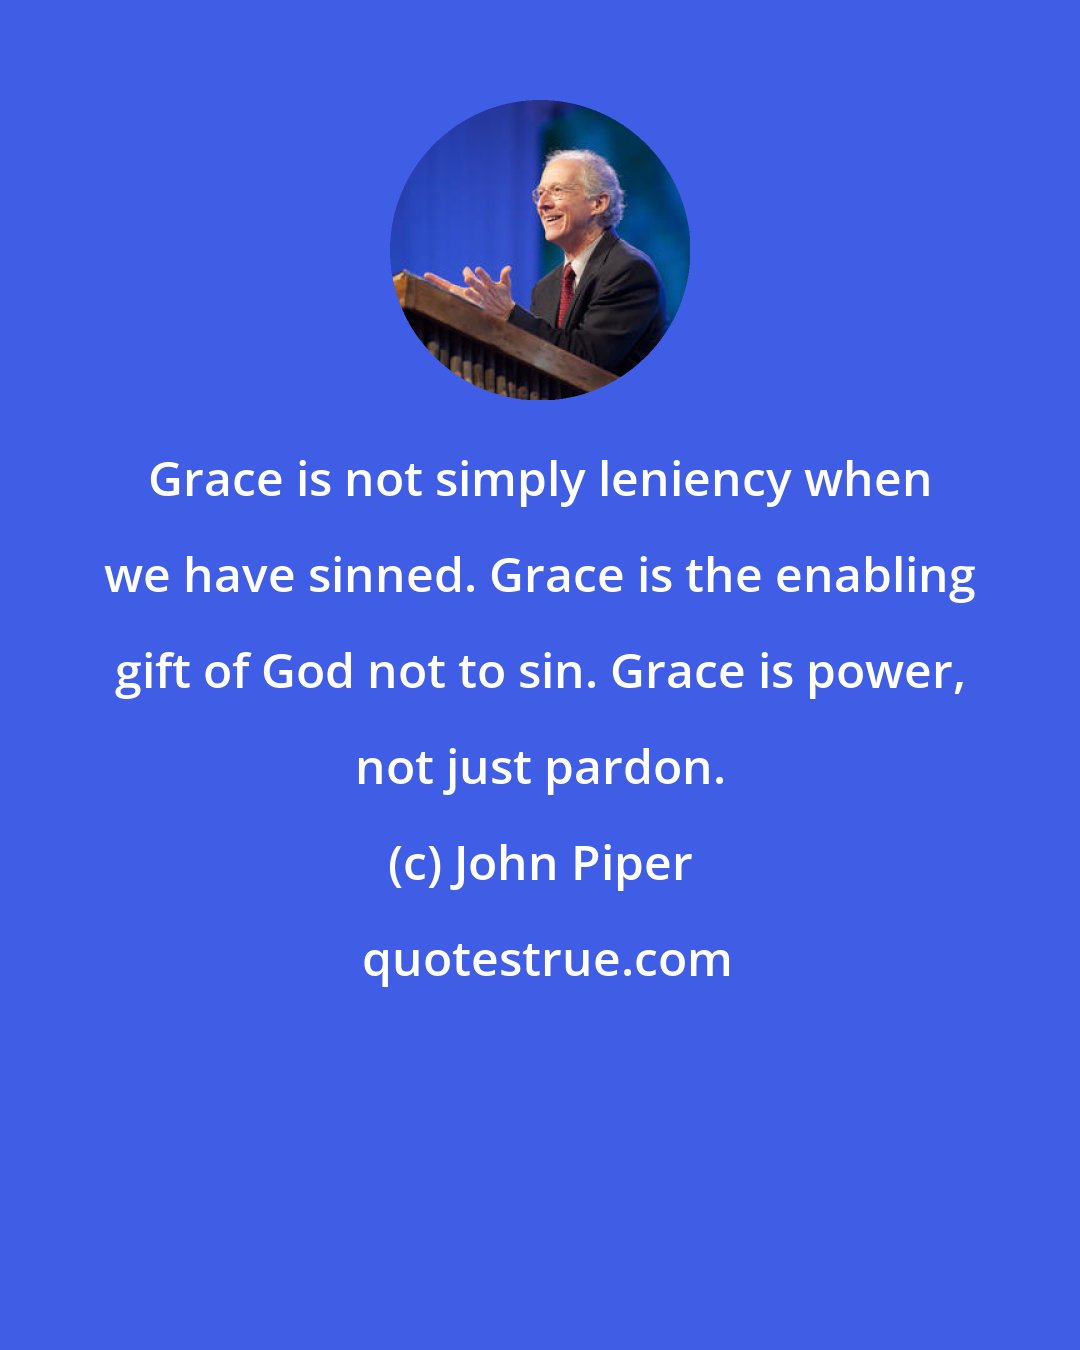 John Piper: Grace is not simply leniency when we have sinned. Grace is the enabling gift of God not to sin. Grace is power, not just pardon.